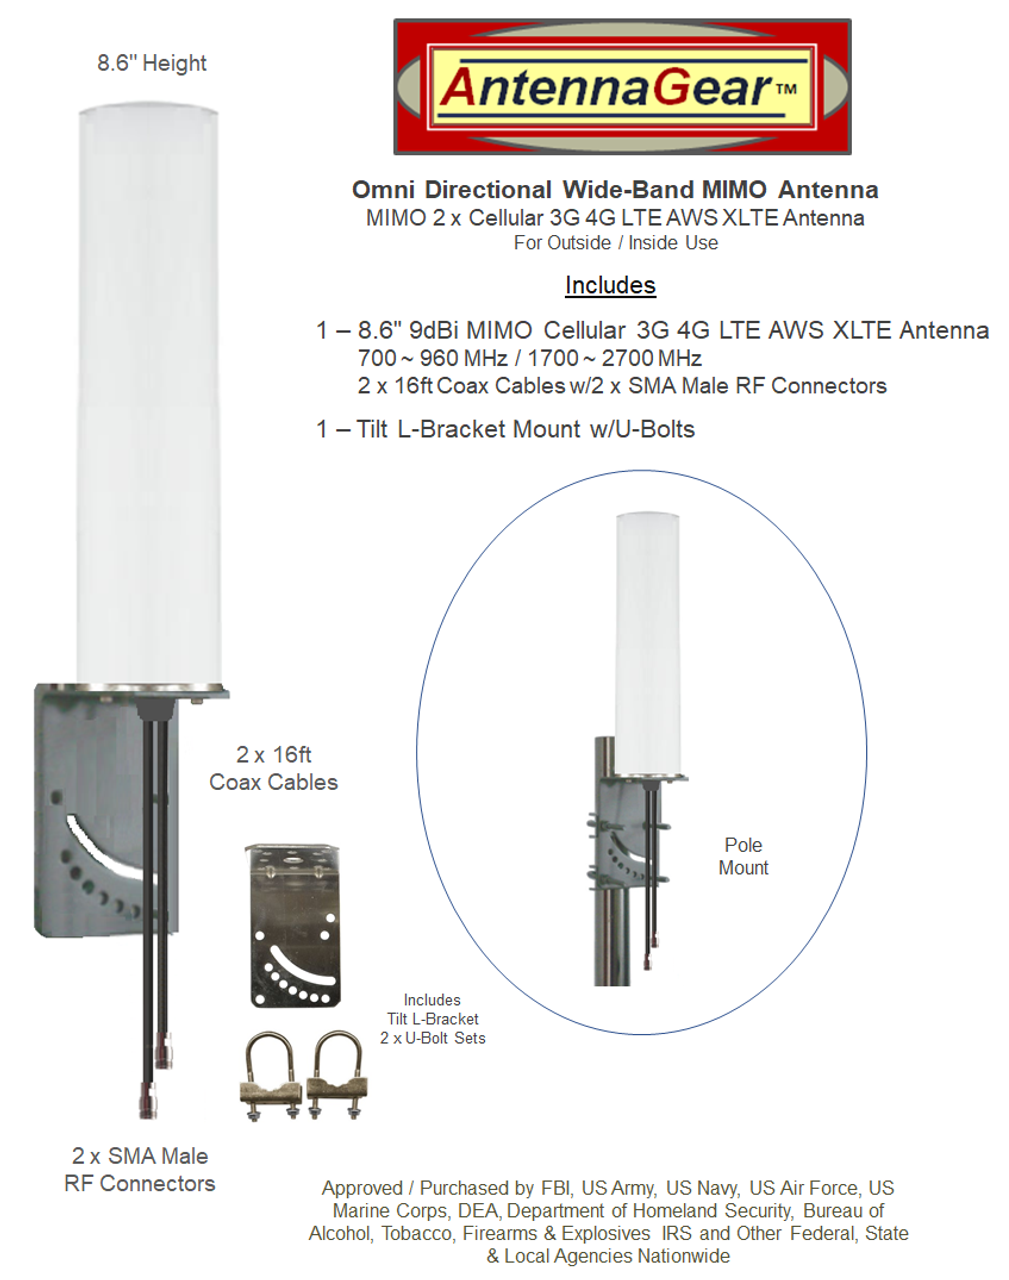 M19 Sierra Wireless GX450 Gateway M19 Omni Directional MIMO Cellular 4G LTE AWS XLTE M2M IoT Antenna w/16ft Coax Cables -2  x SMA